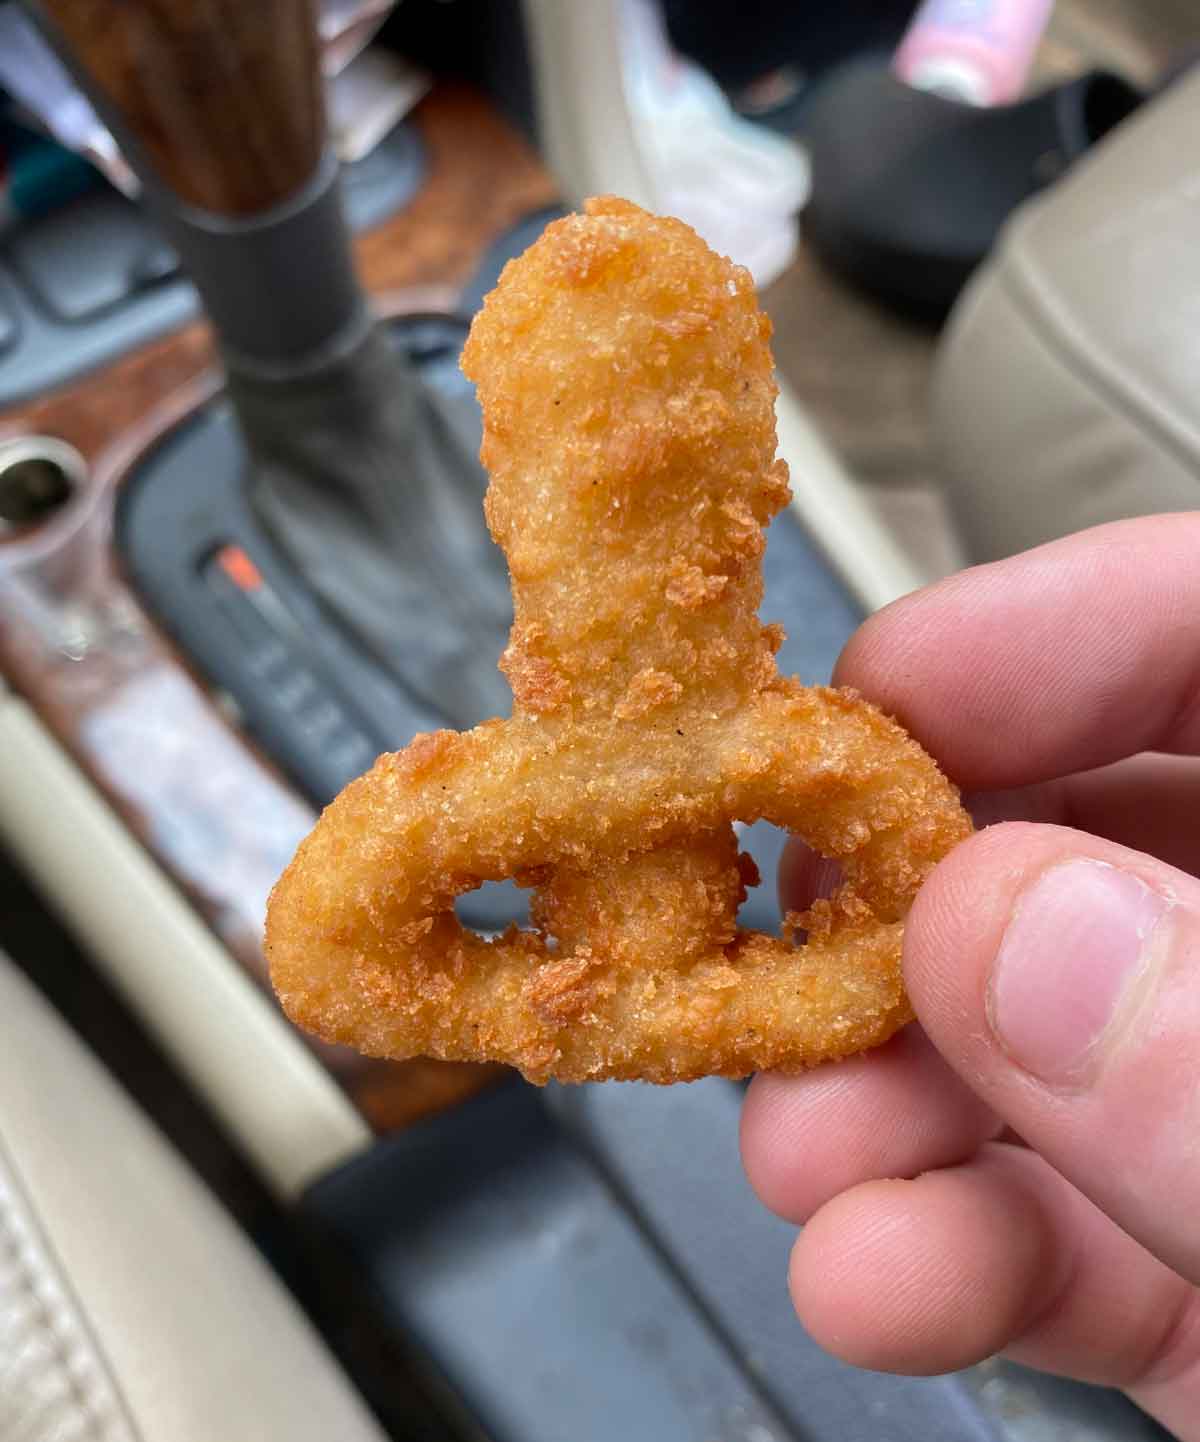 I ordered onion rings from Burger King and they gave me this